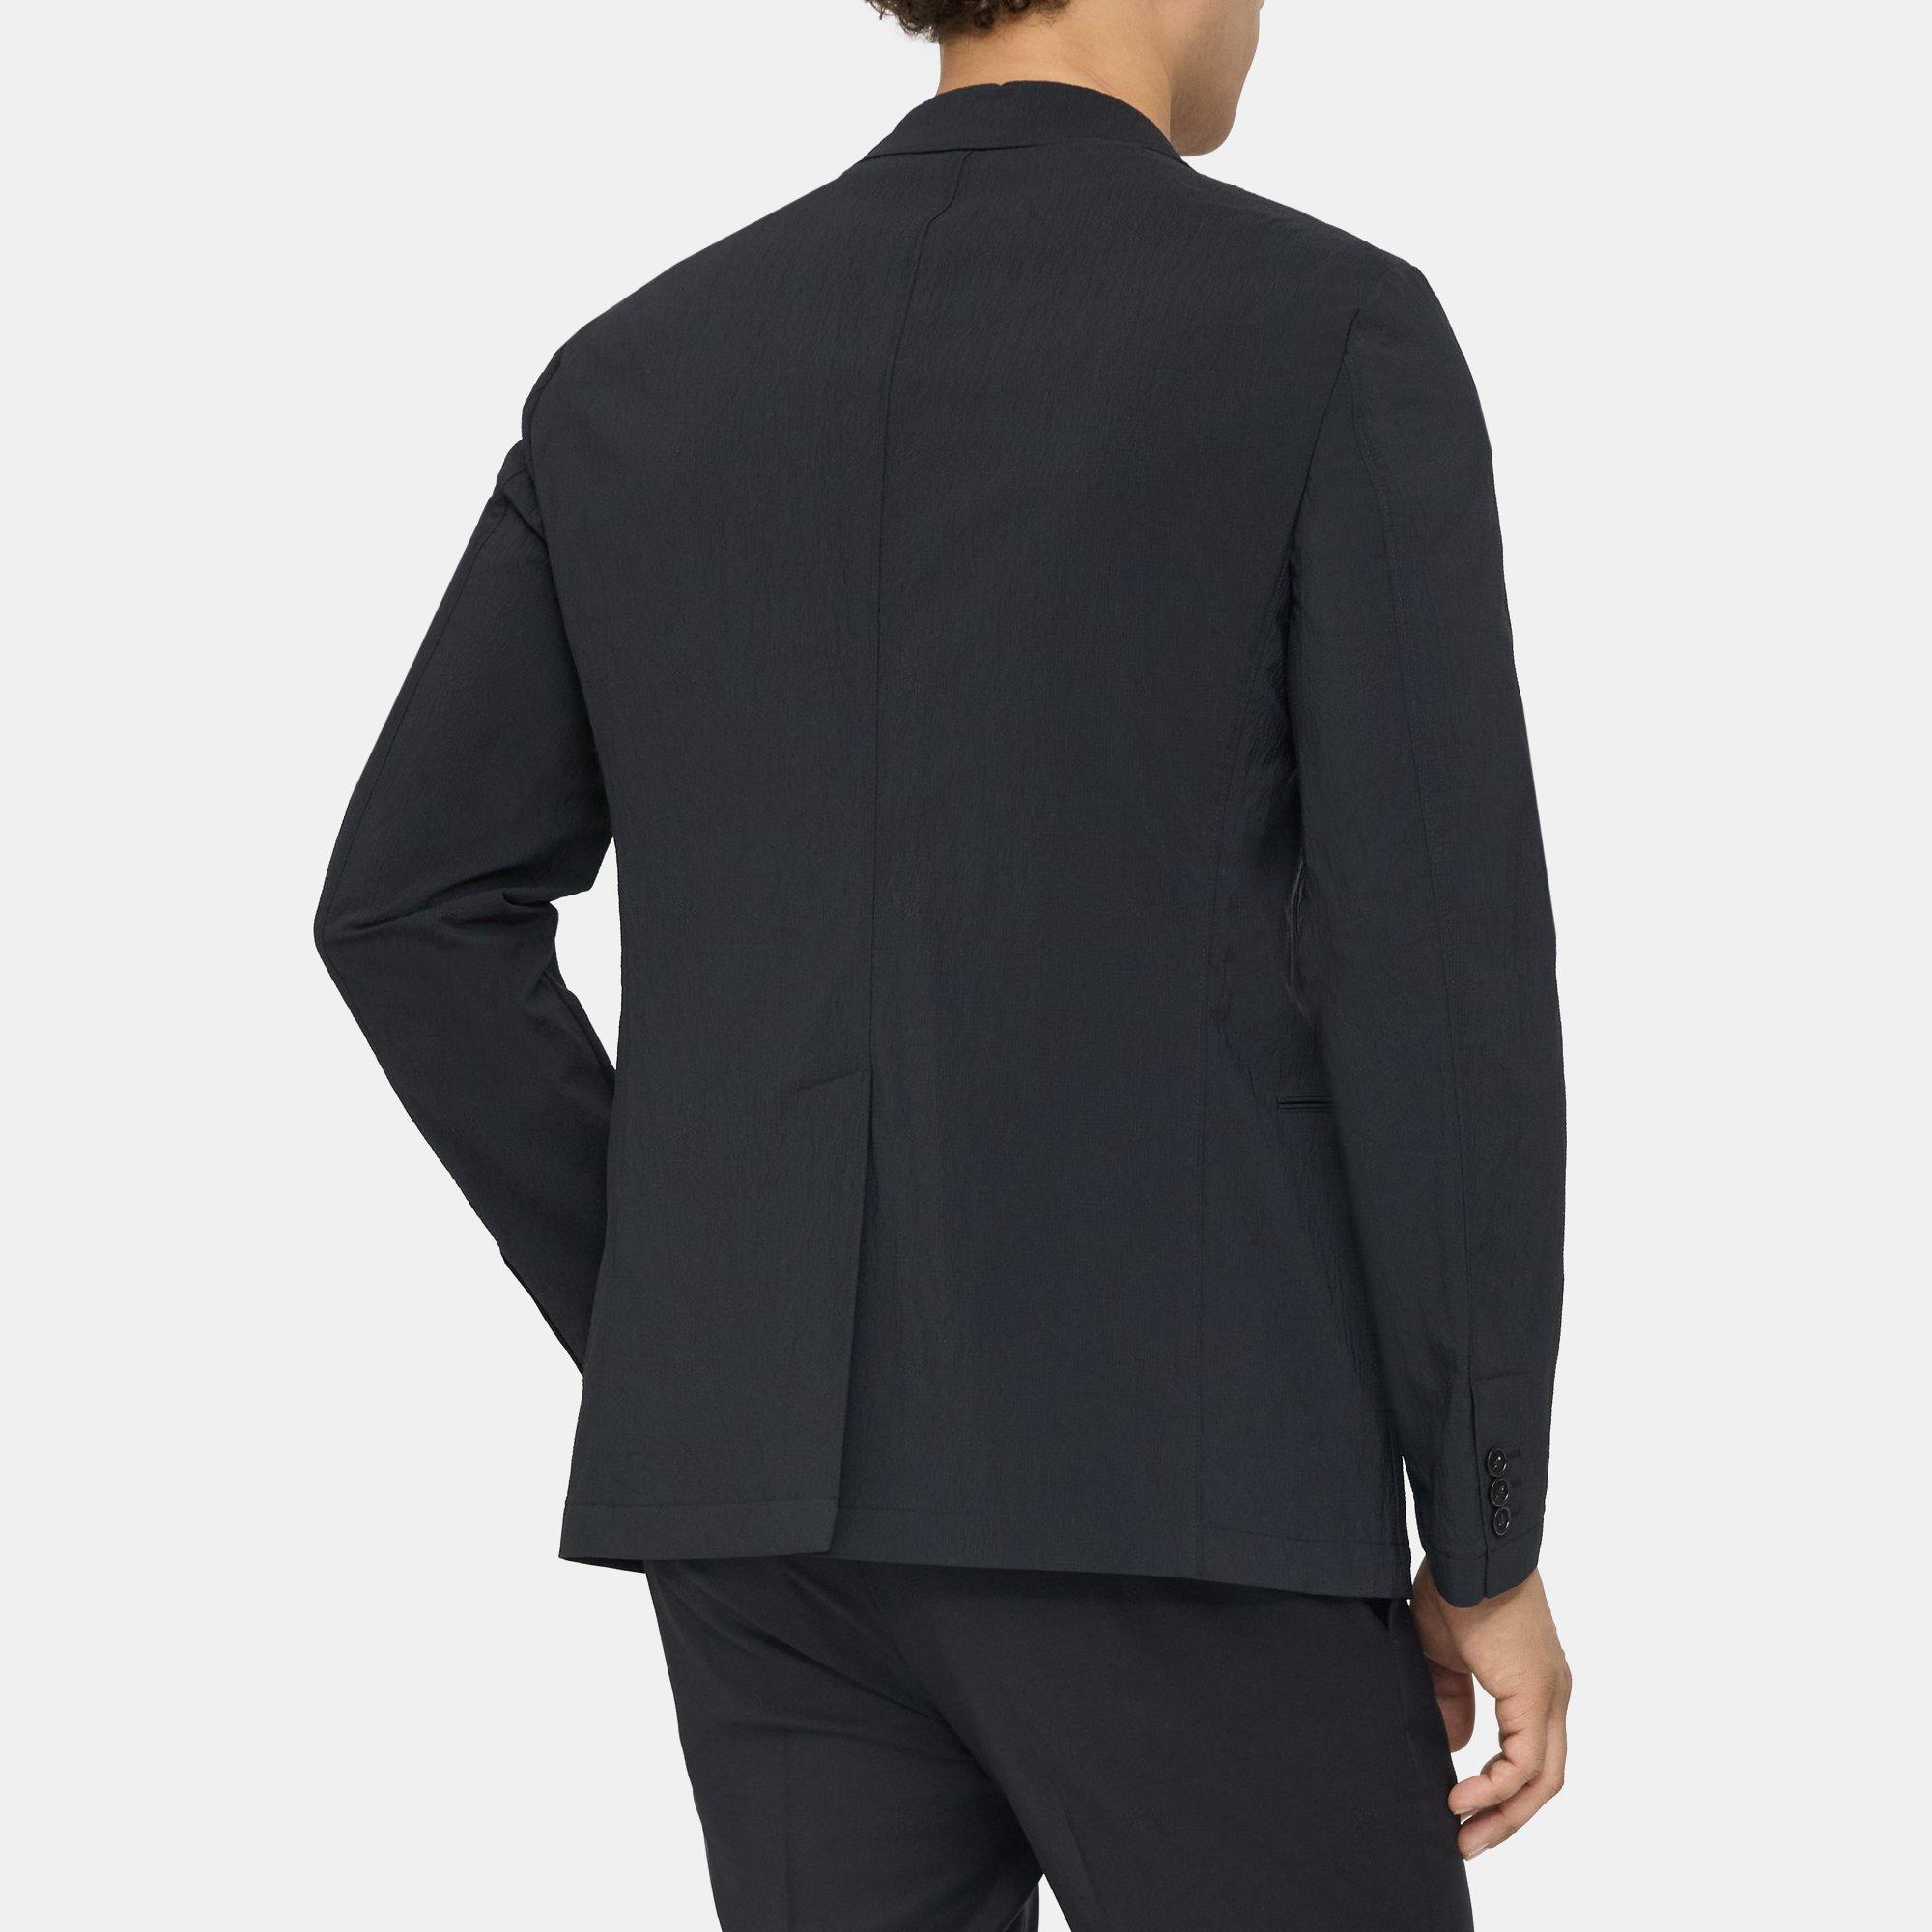 Nylon Blend Unstructured Suit Jacket | Theory Outlet